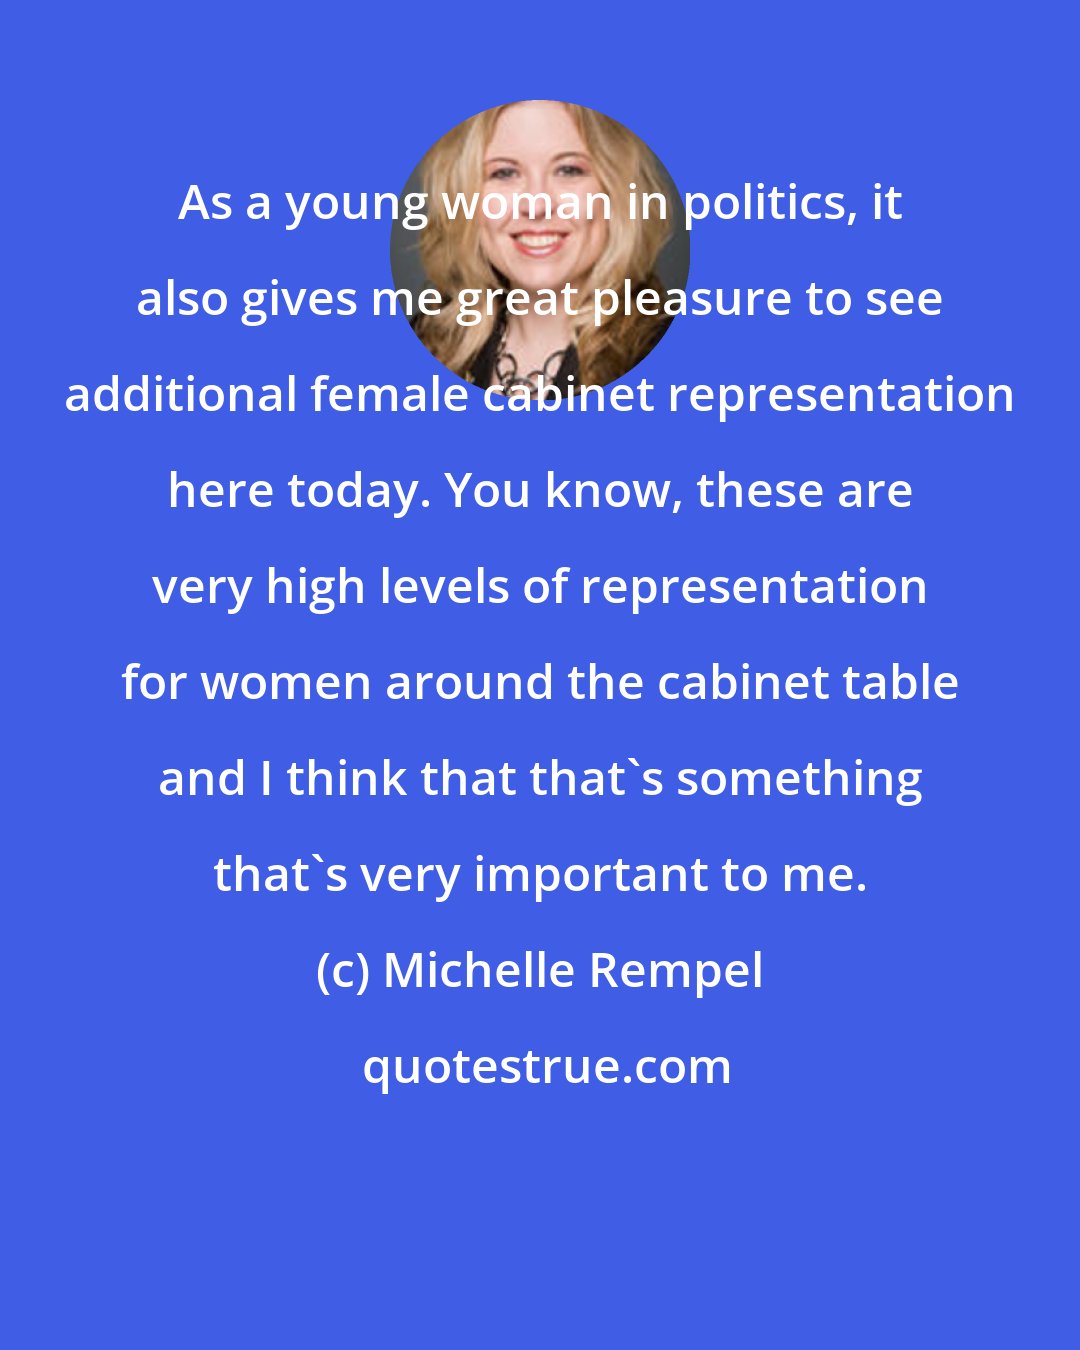 Michelle Rempel: As a young woman in politics, it also gives me great pleasure to see additional female cabinet representation here today. You know, these are very high levels of representation for women around the cabinet table and I think that that's something that's very important to me.